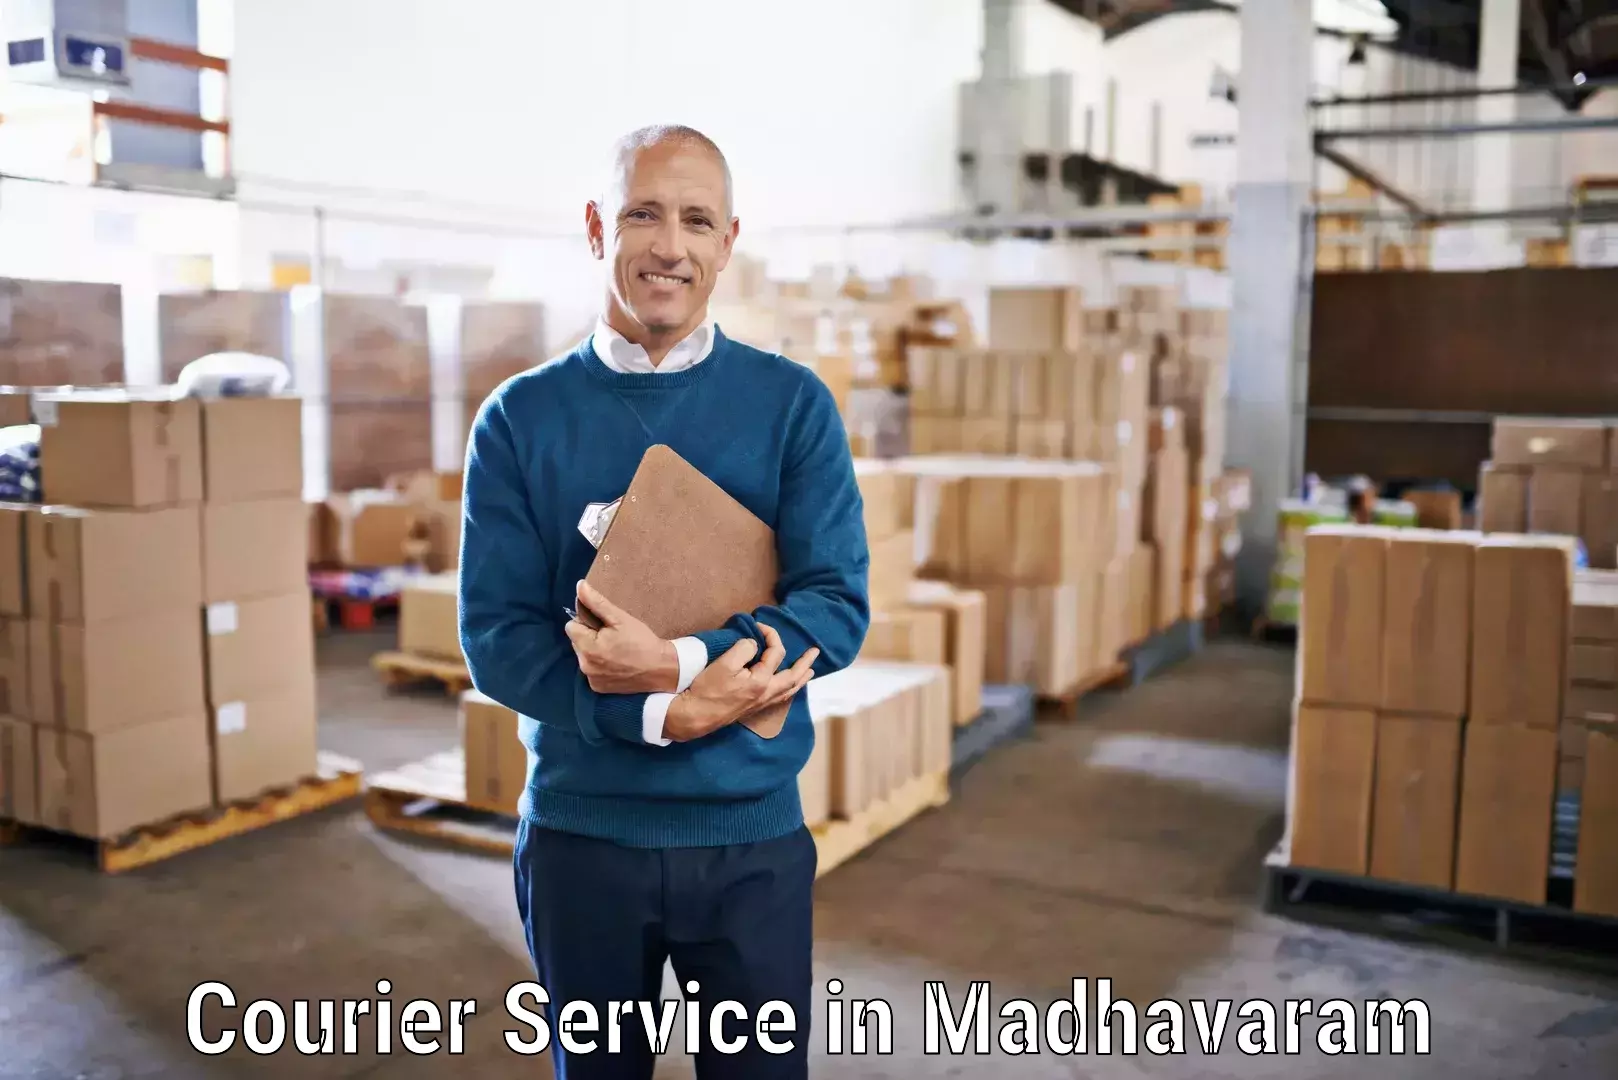 Expedited shipping solutions in Madhavaram